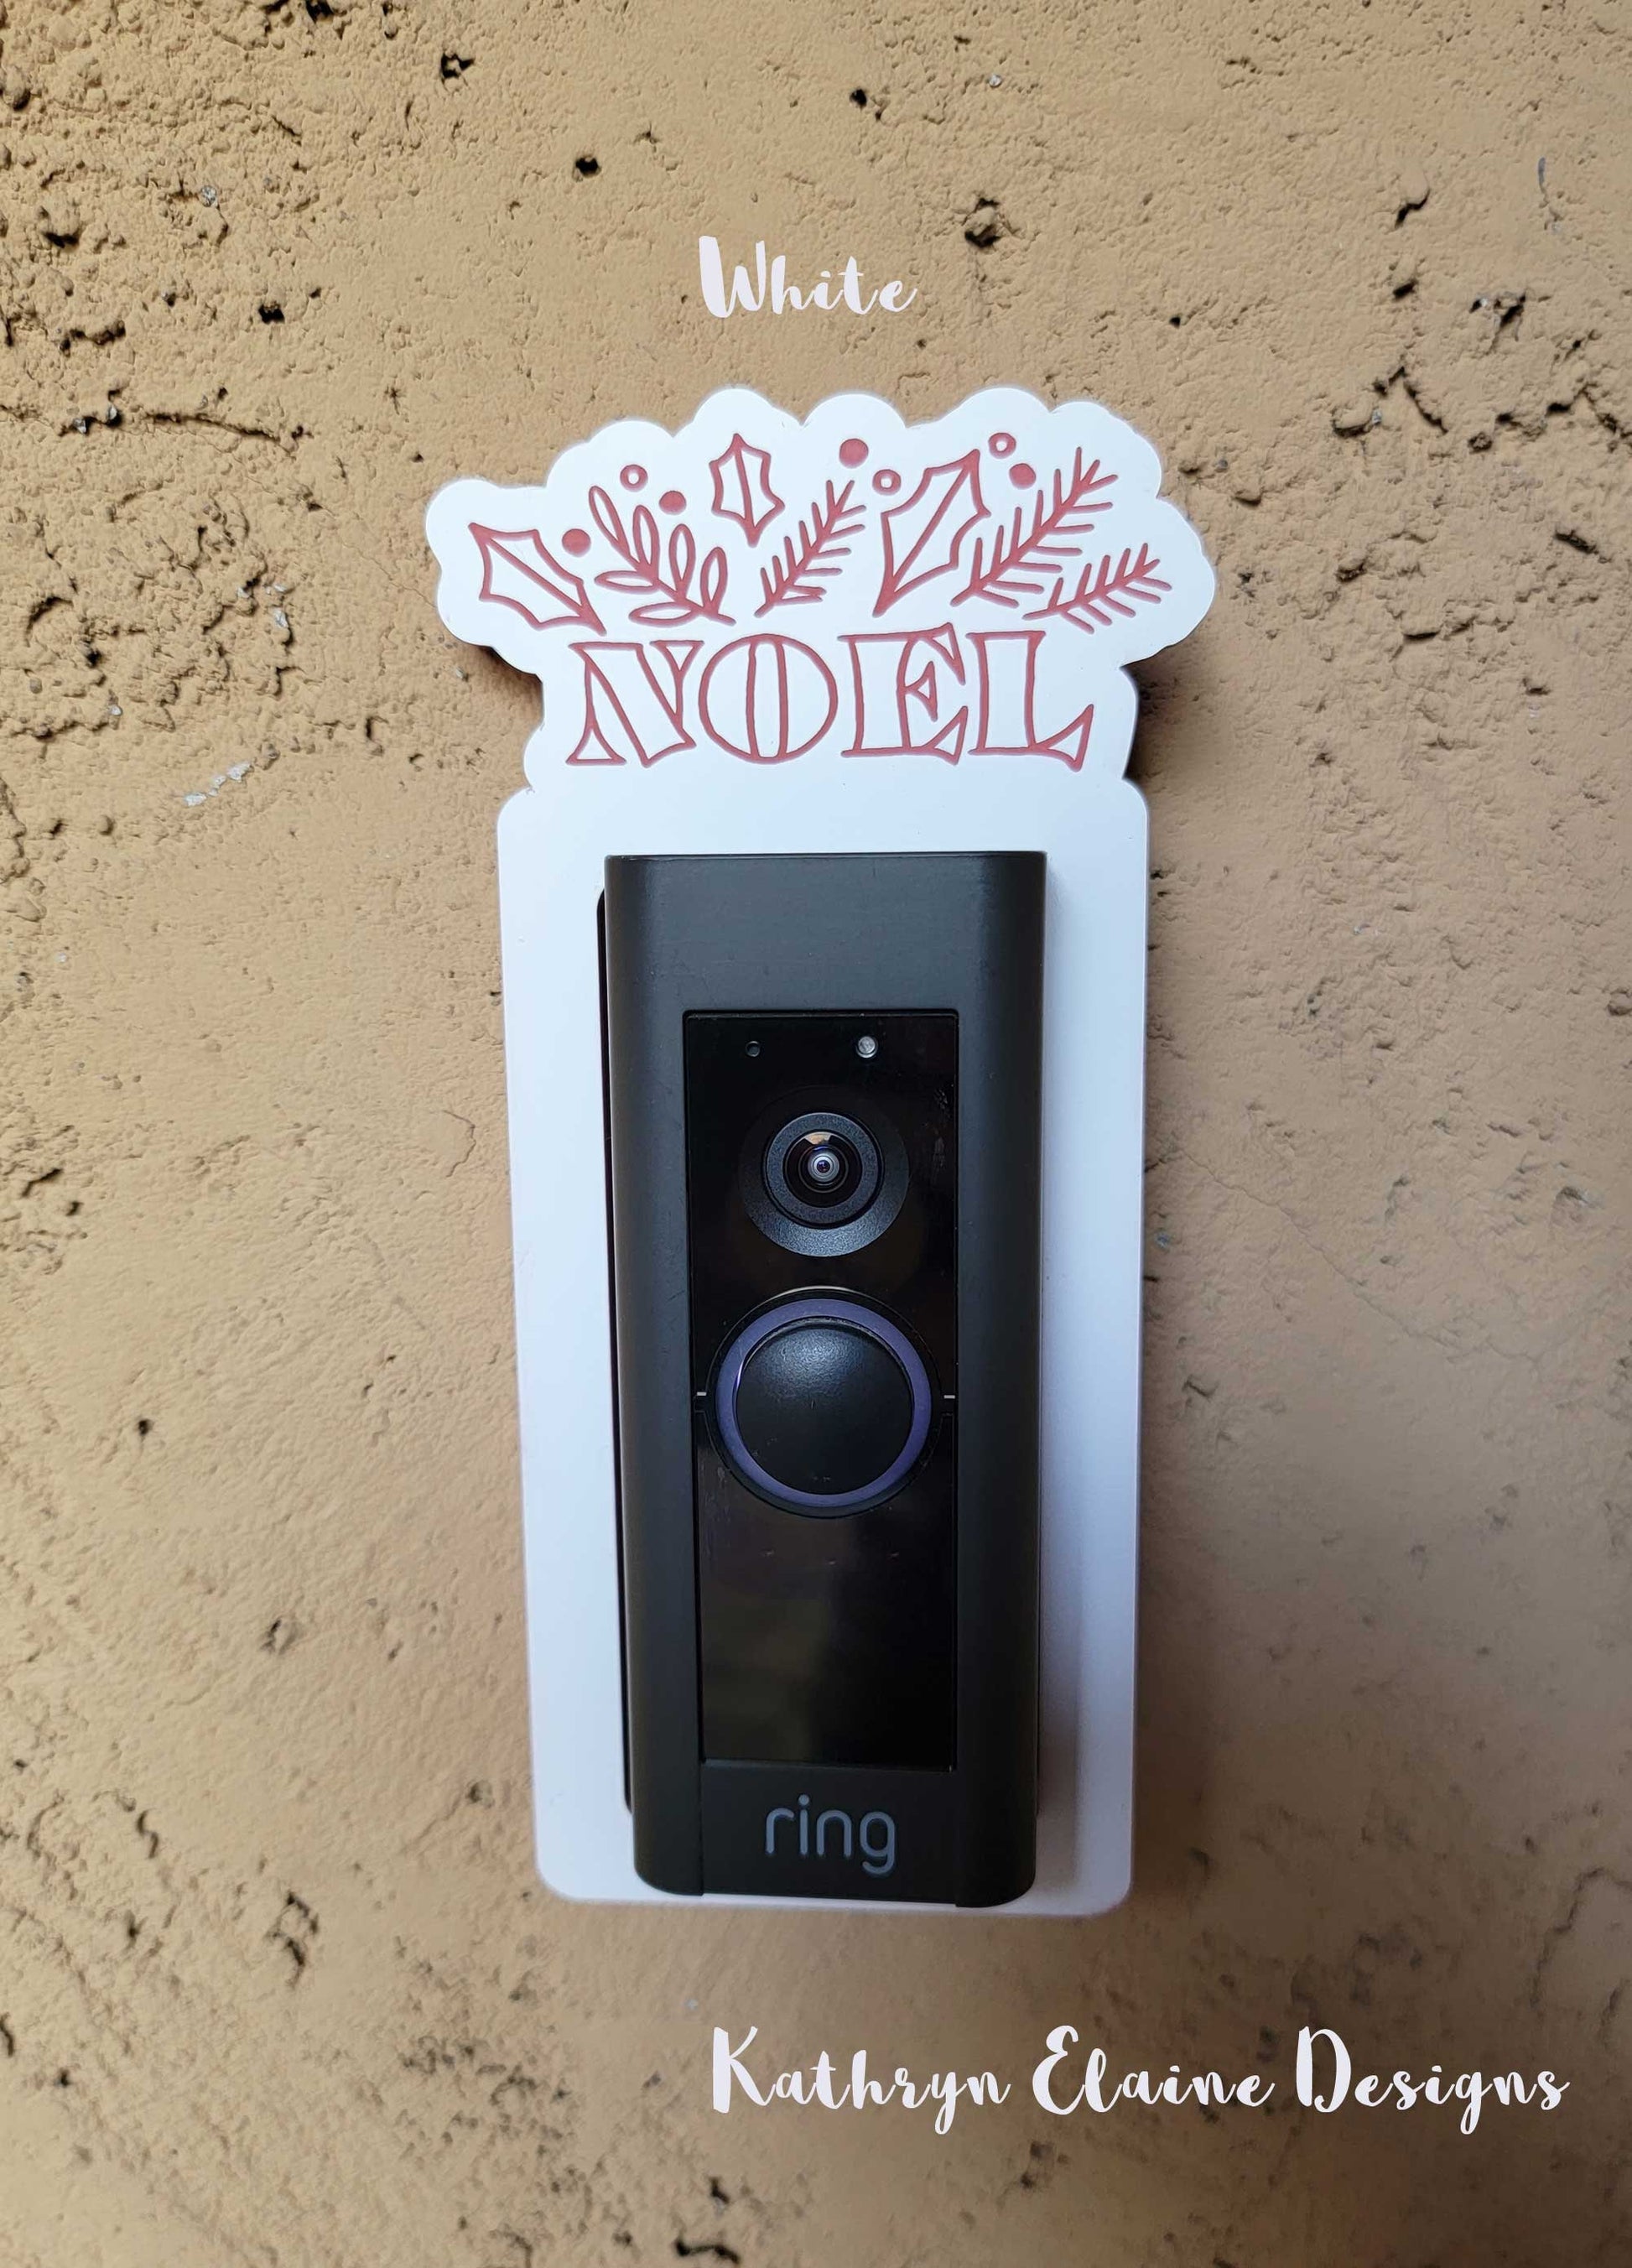 White laminate doorbell surround with red lettering saying Noel and holly, leaf design around ring doorbell on tan background.